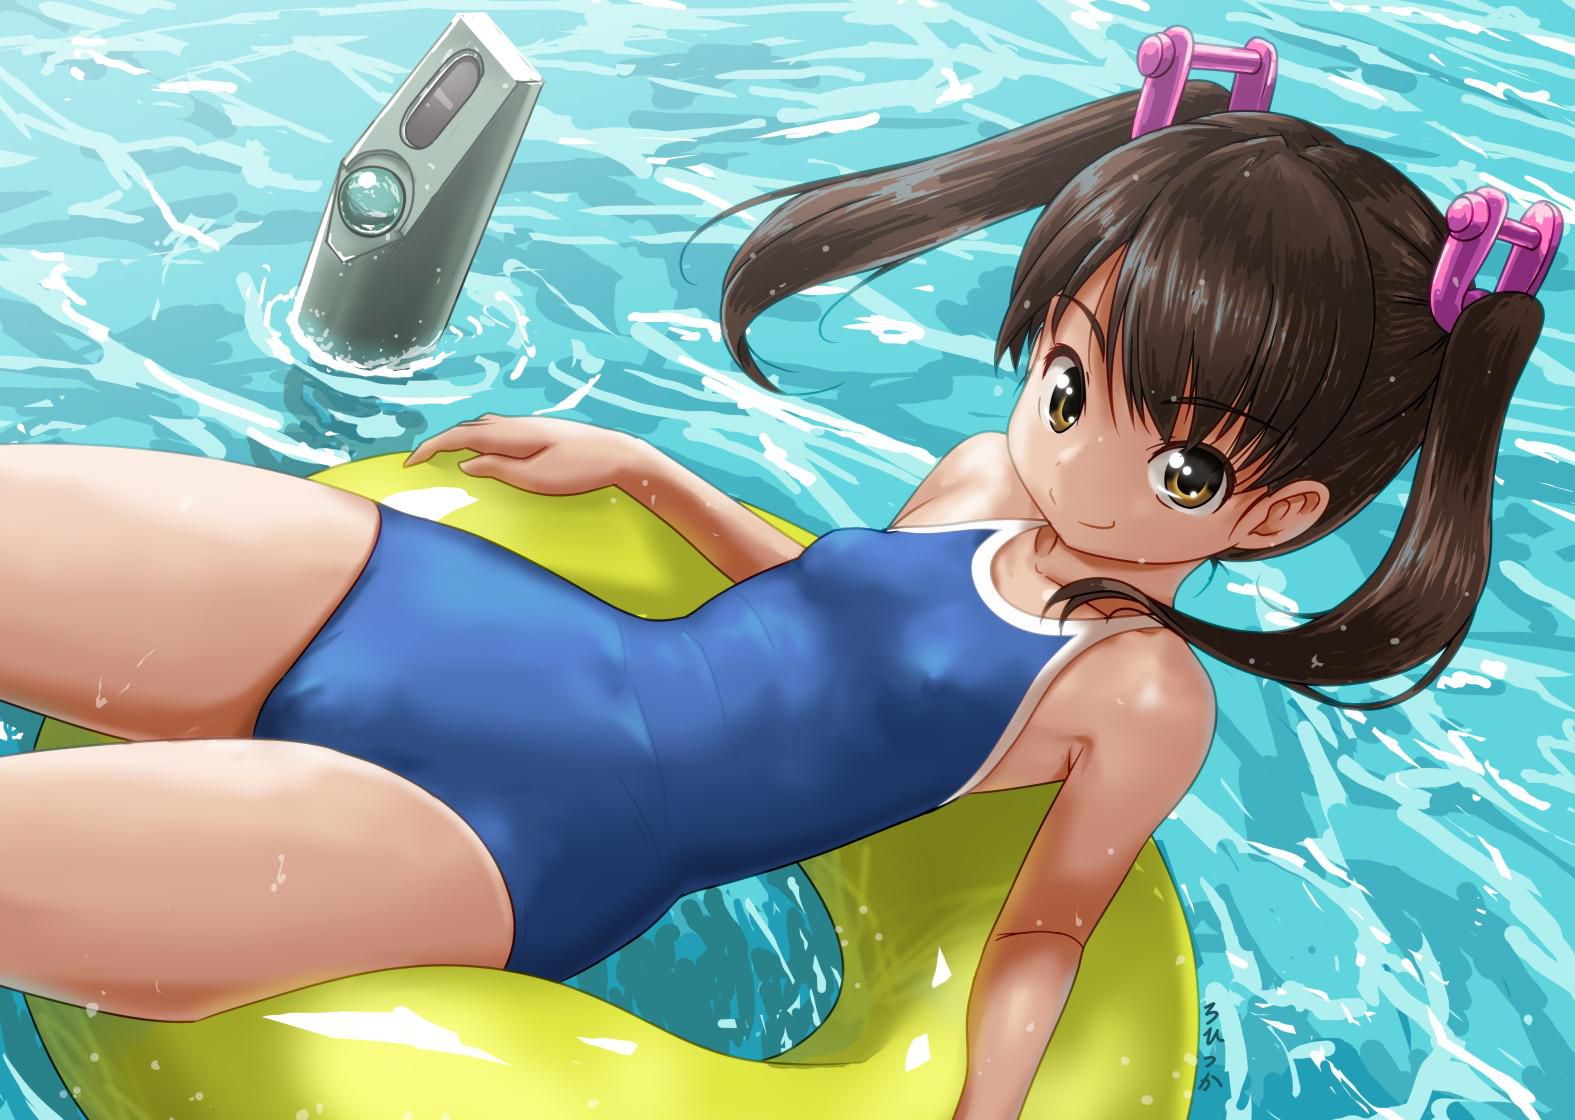 A combination of dark blue school swimsuit and cute loli is moe-chi-tei image ♪ (18) 38